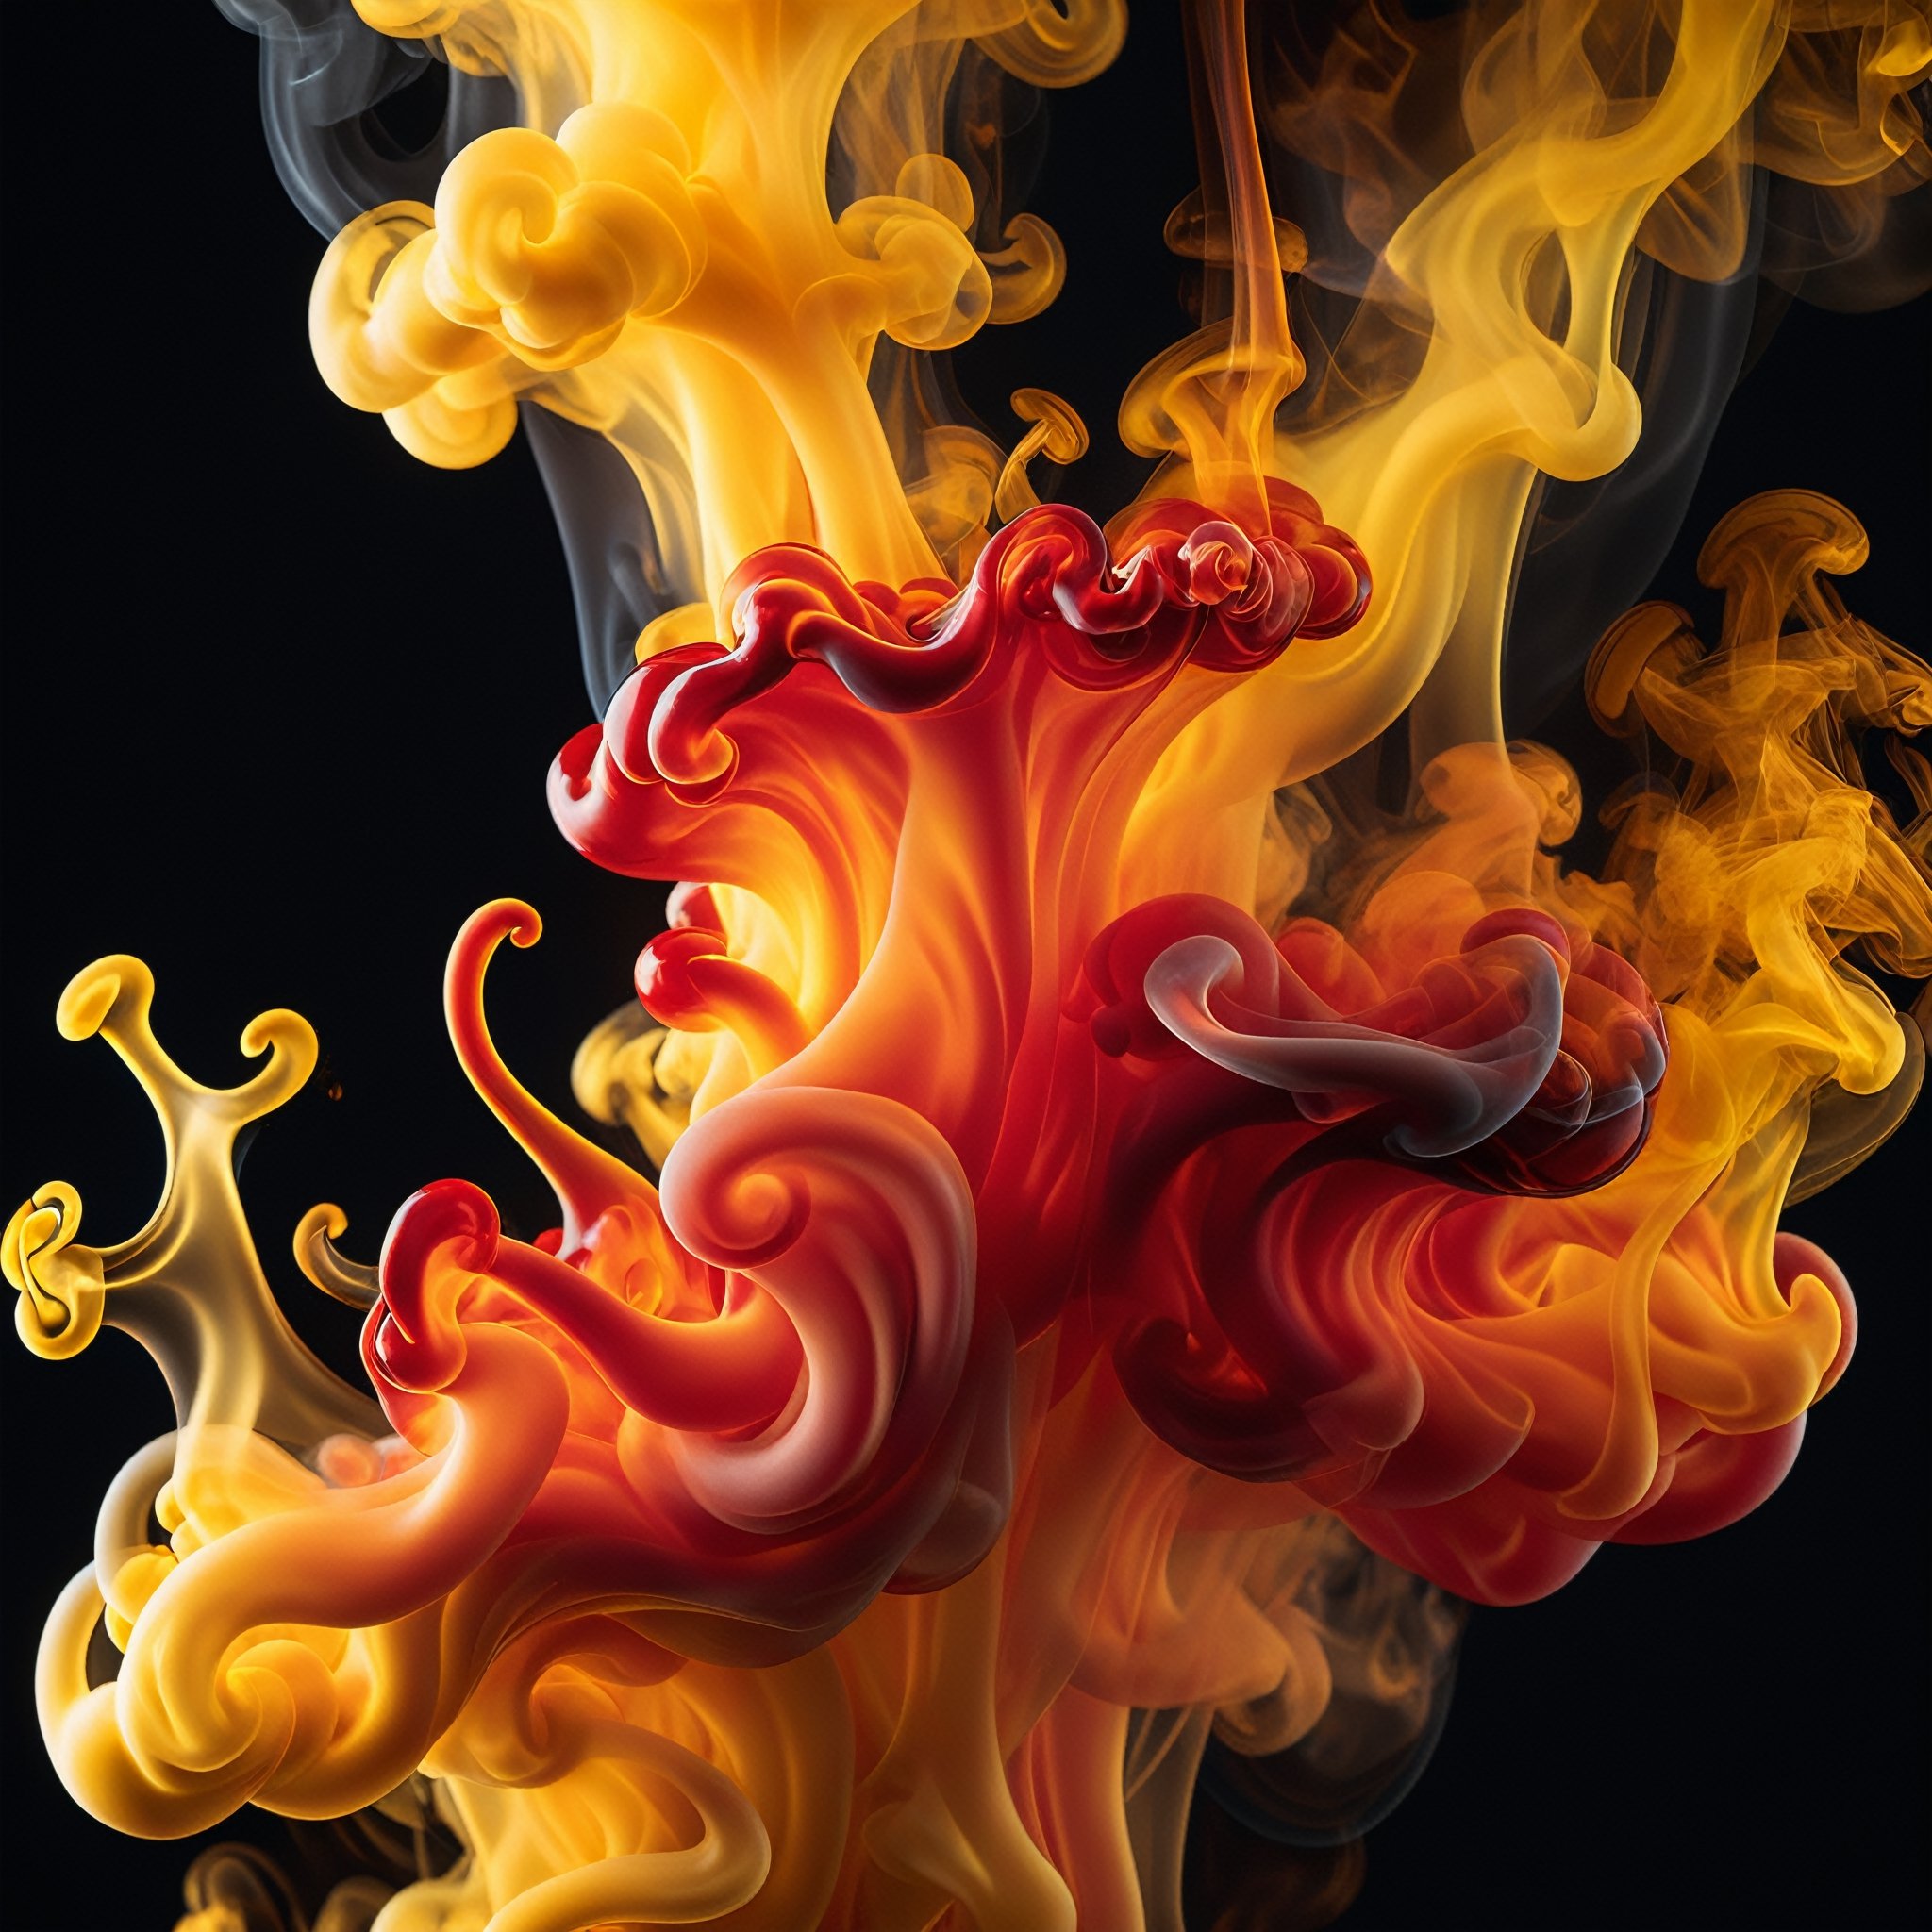 Liquid and Smoke, Dark Backdrop, Wallpaper. ral-barriertapetranslucent , colors yellow and red
,Movie Still,more detail XL,colorful